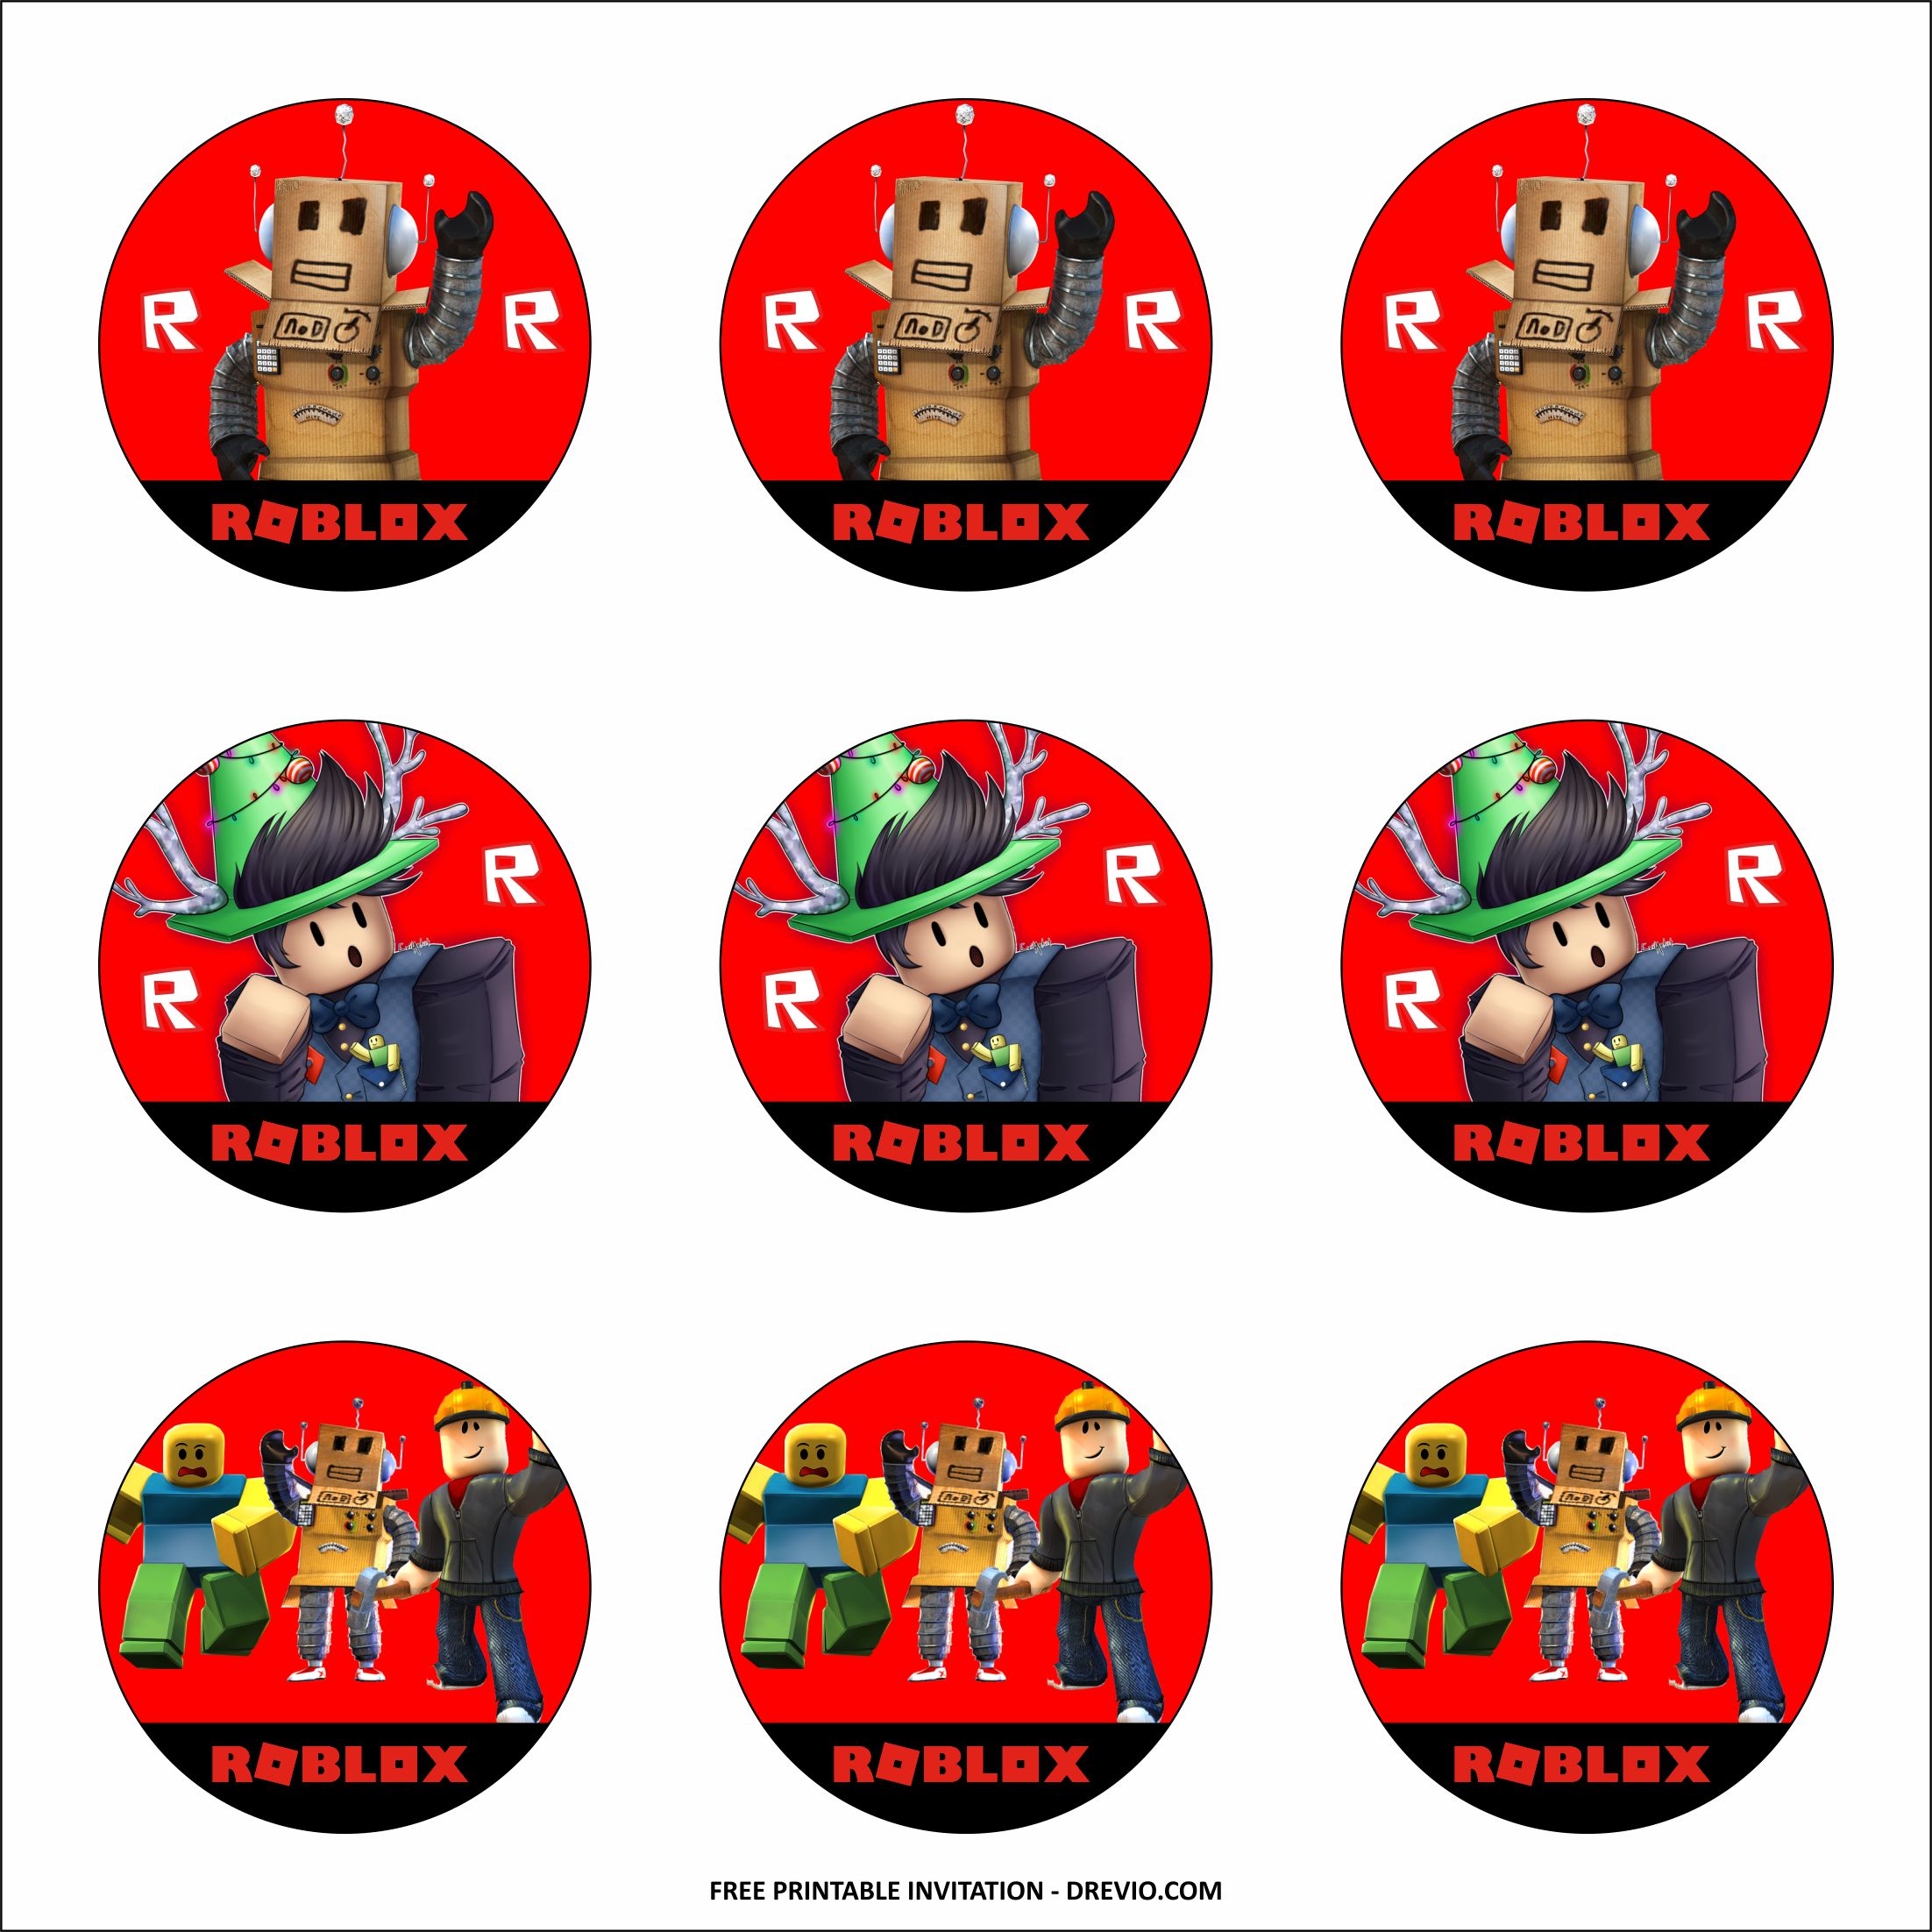 Roblox • Topper • Pennants • Stickers • Cupcake Toppers • FREE